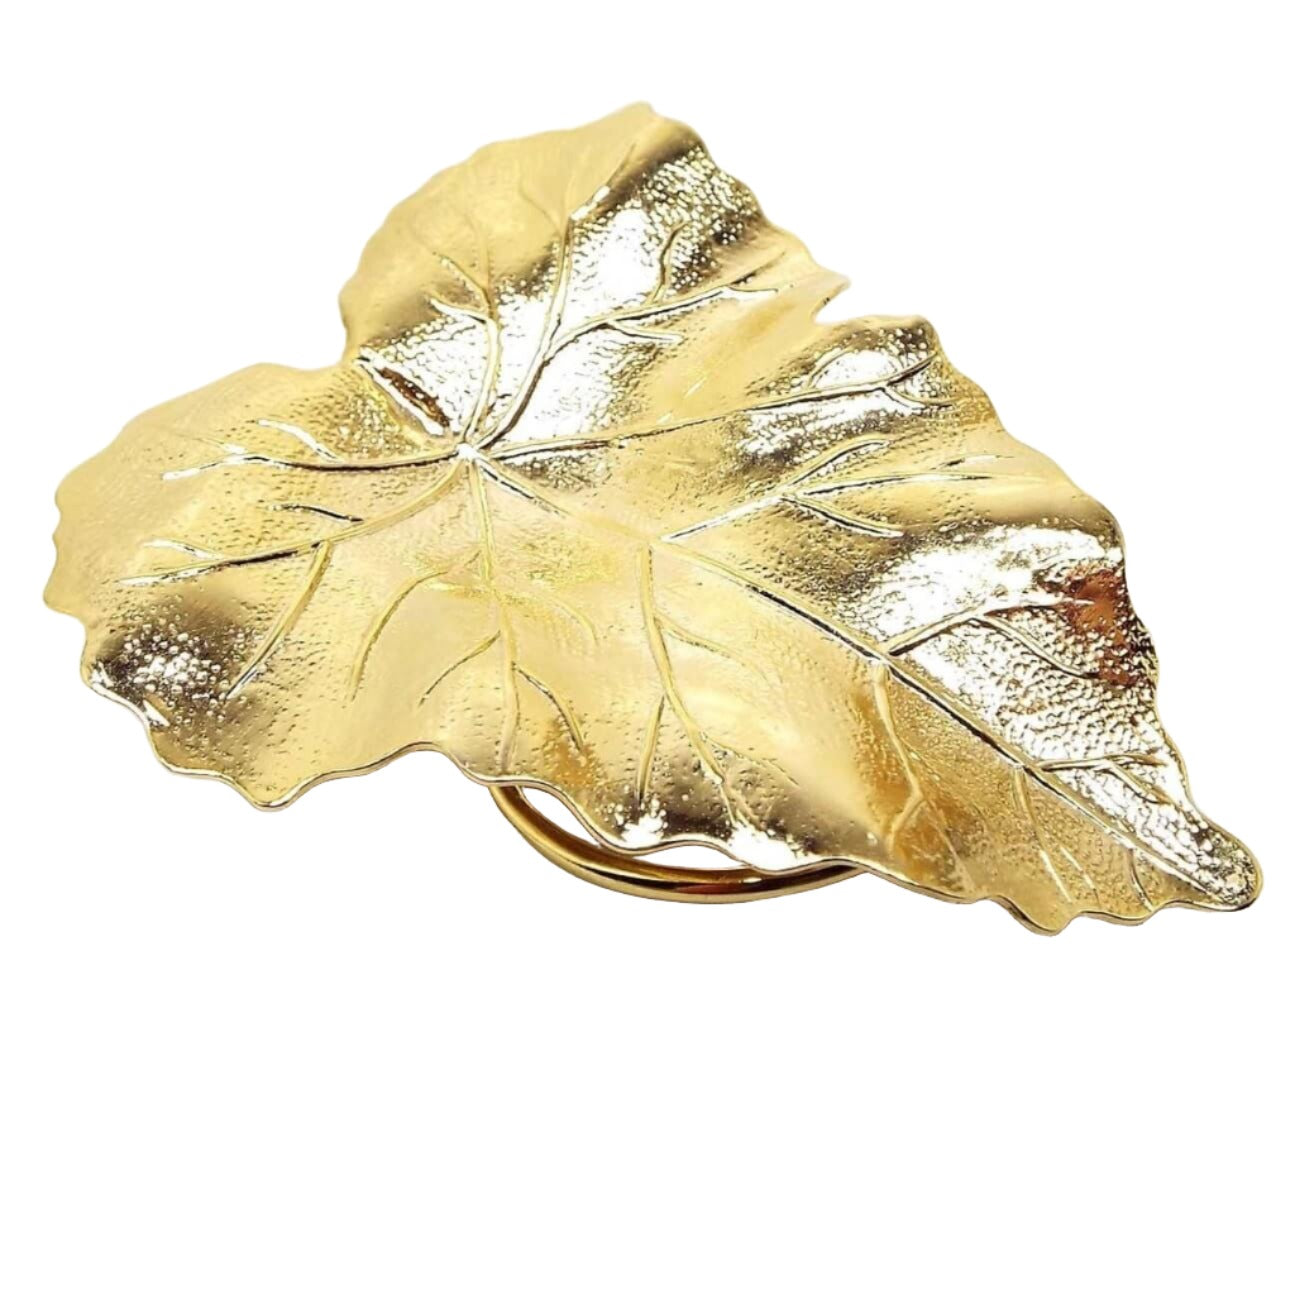 Top view of the large retro vintage leaf scarf clip. It is gold tone in color and has a detailed leaf design with lightly textured metal. Part of the round ring clip on the back is showing in the photo.